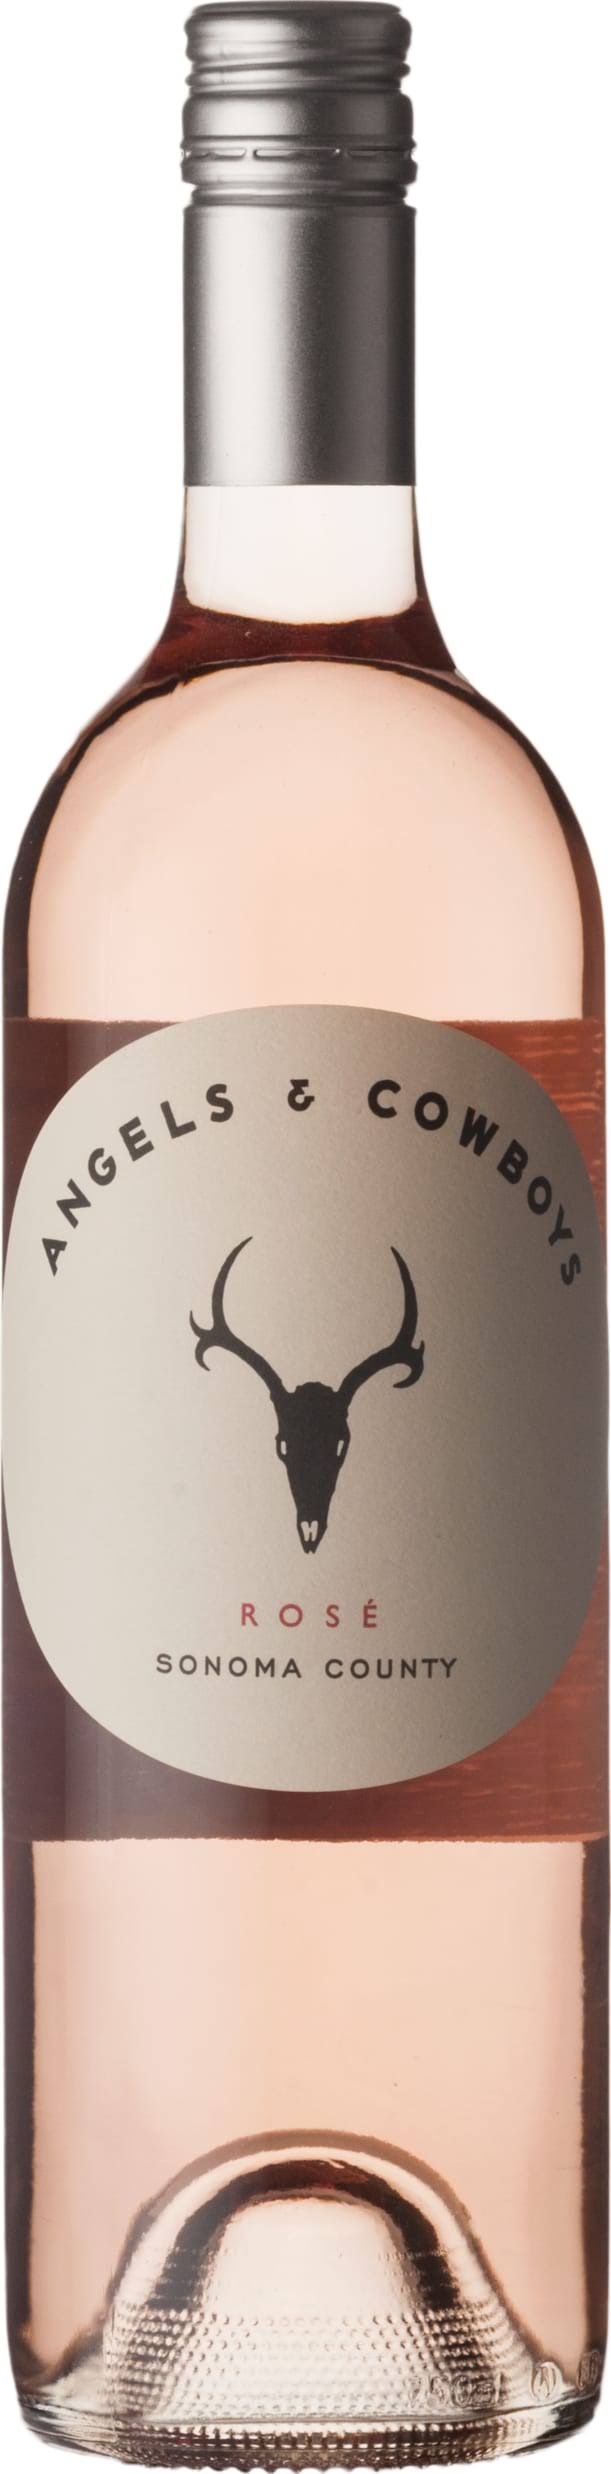 Angels & Cowboys Rose - Sonoma County, 2016